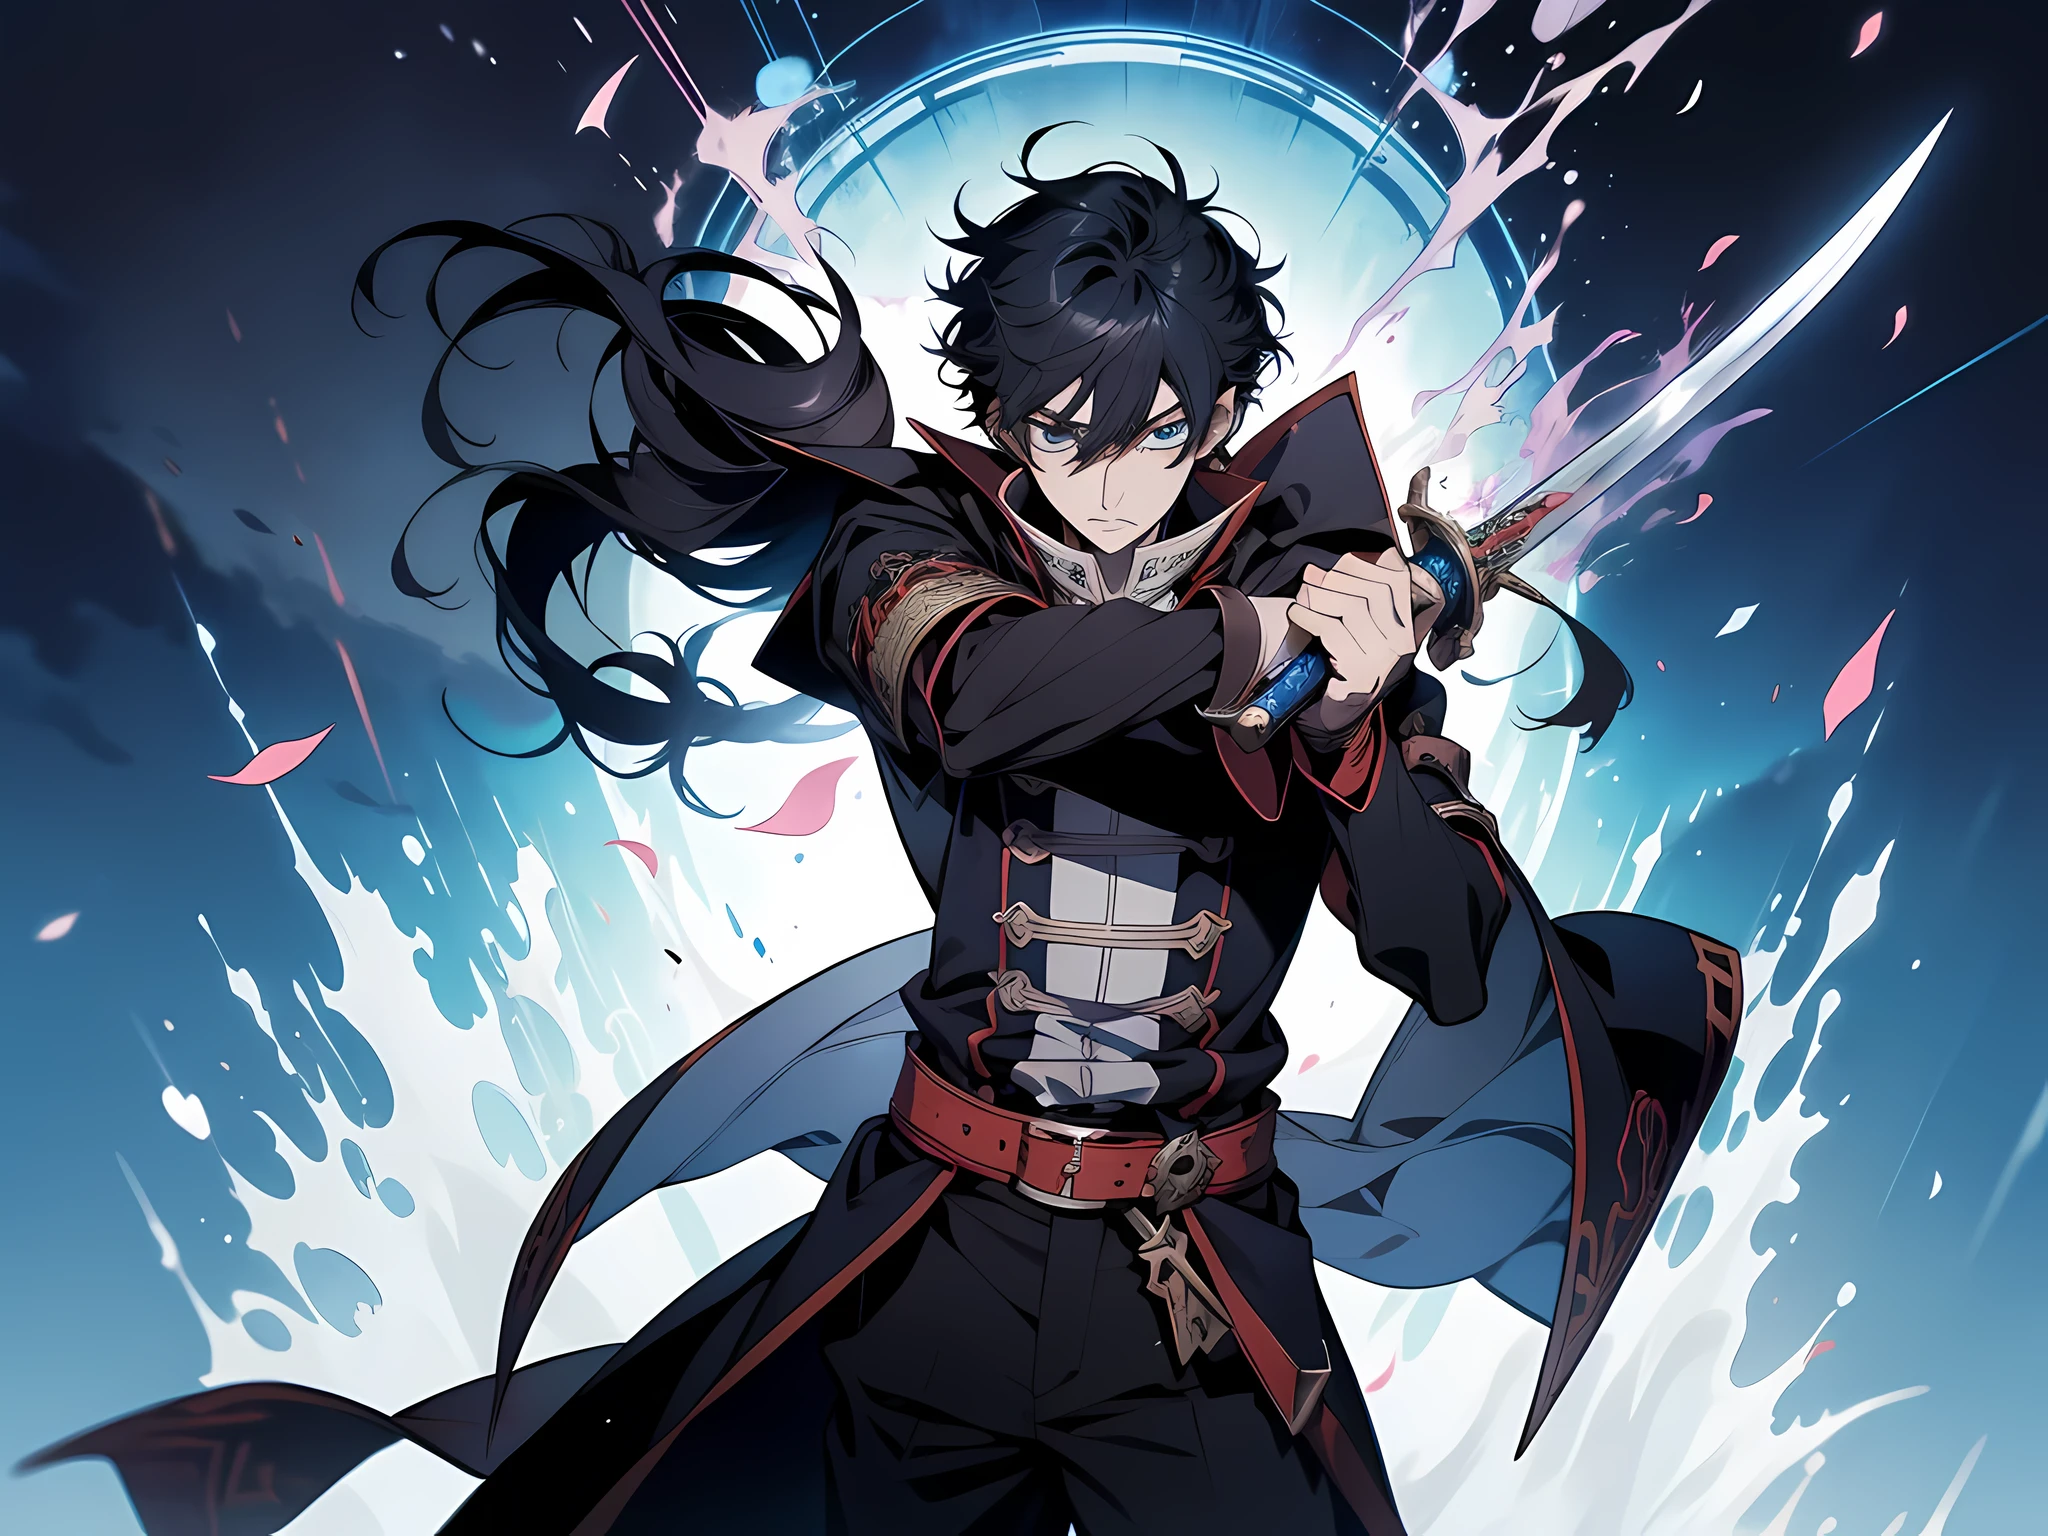 (1 man) anime character with sword in hand and blue background, trigger anime artstyle, tall anime guy with blue eyes, inspired by Okumura Masanobu, anime fencer, key anime art, an edgy teen assassin, demon slayer art, inspired by Okumura Togyu, kentaro miura manga art style, handsome anime pose
